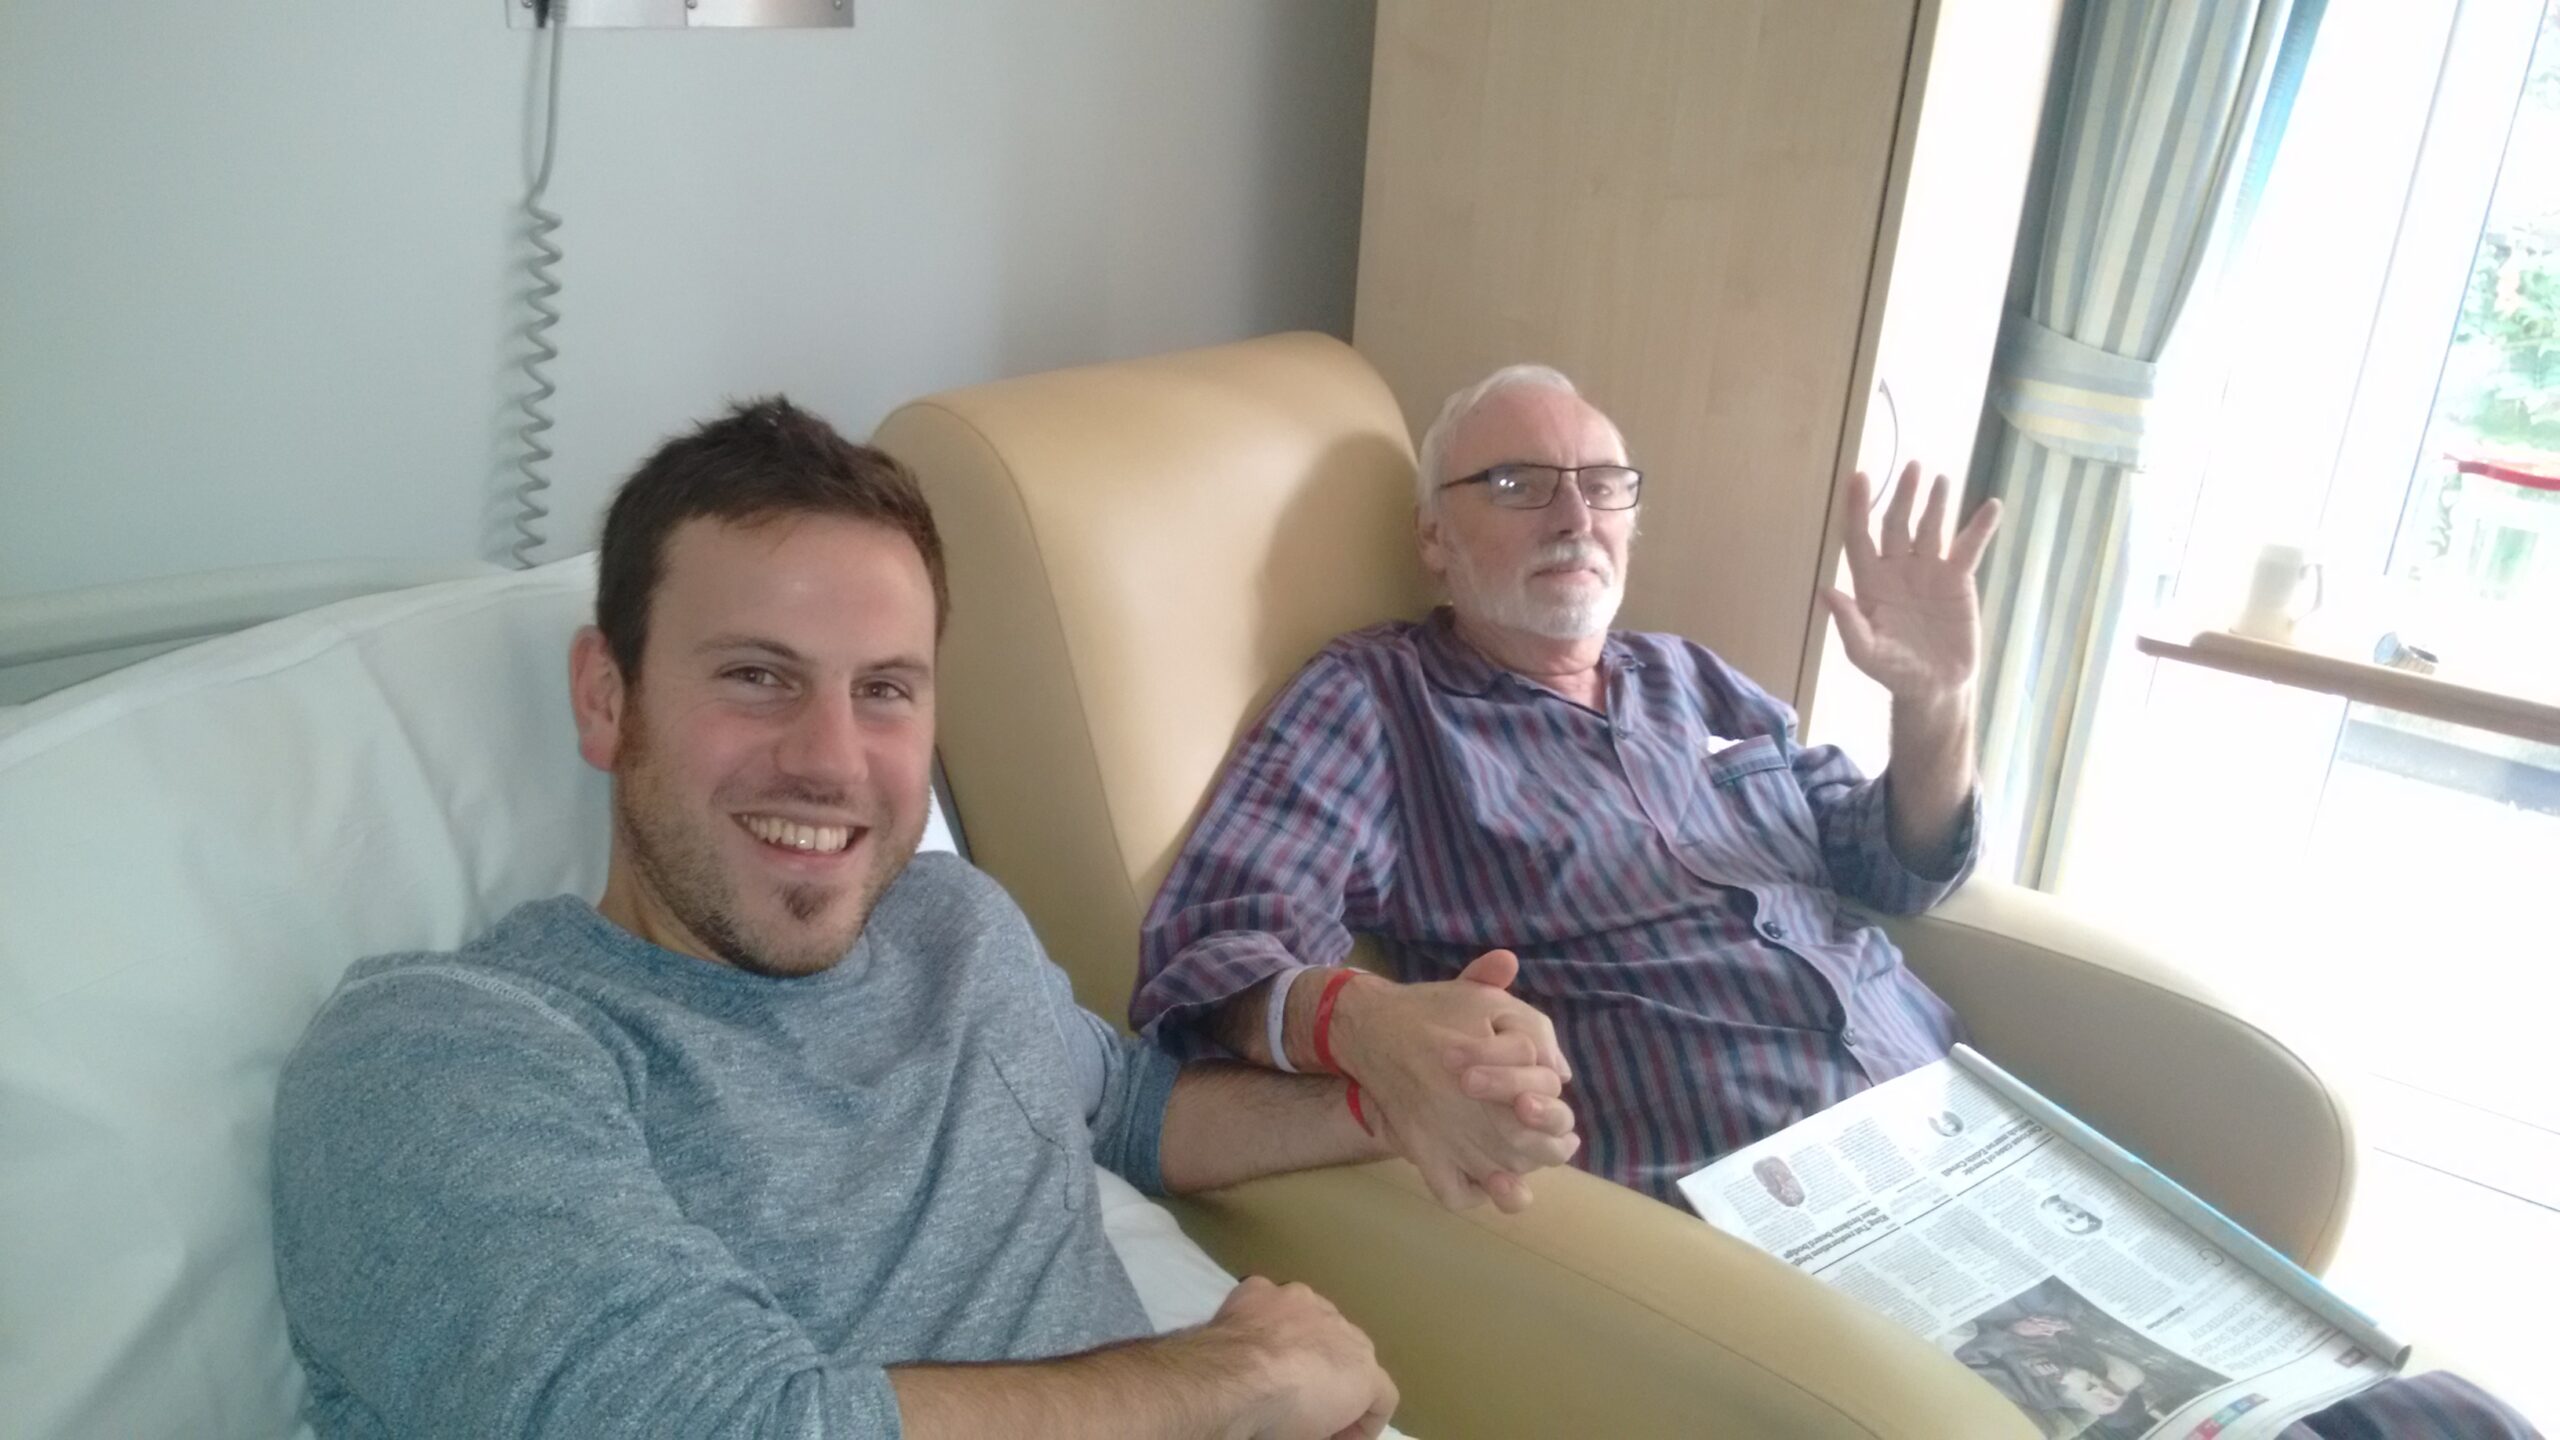 A patient at the St Barnabas Inpatient Unit, Steve Hardy,with his son, Jim Hardy. Steve is sat in a recliner bed, with Jim by his side, holding hands.